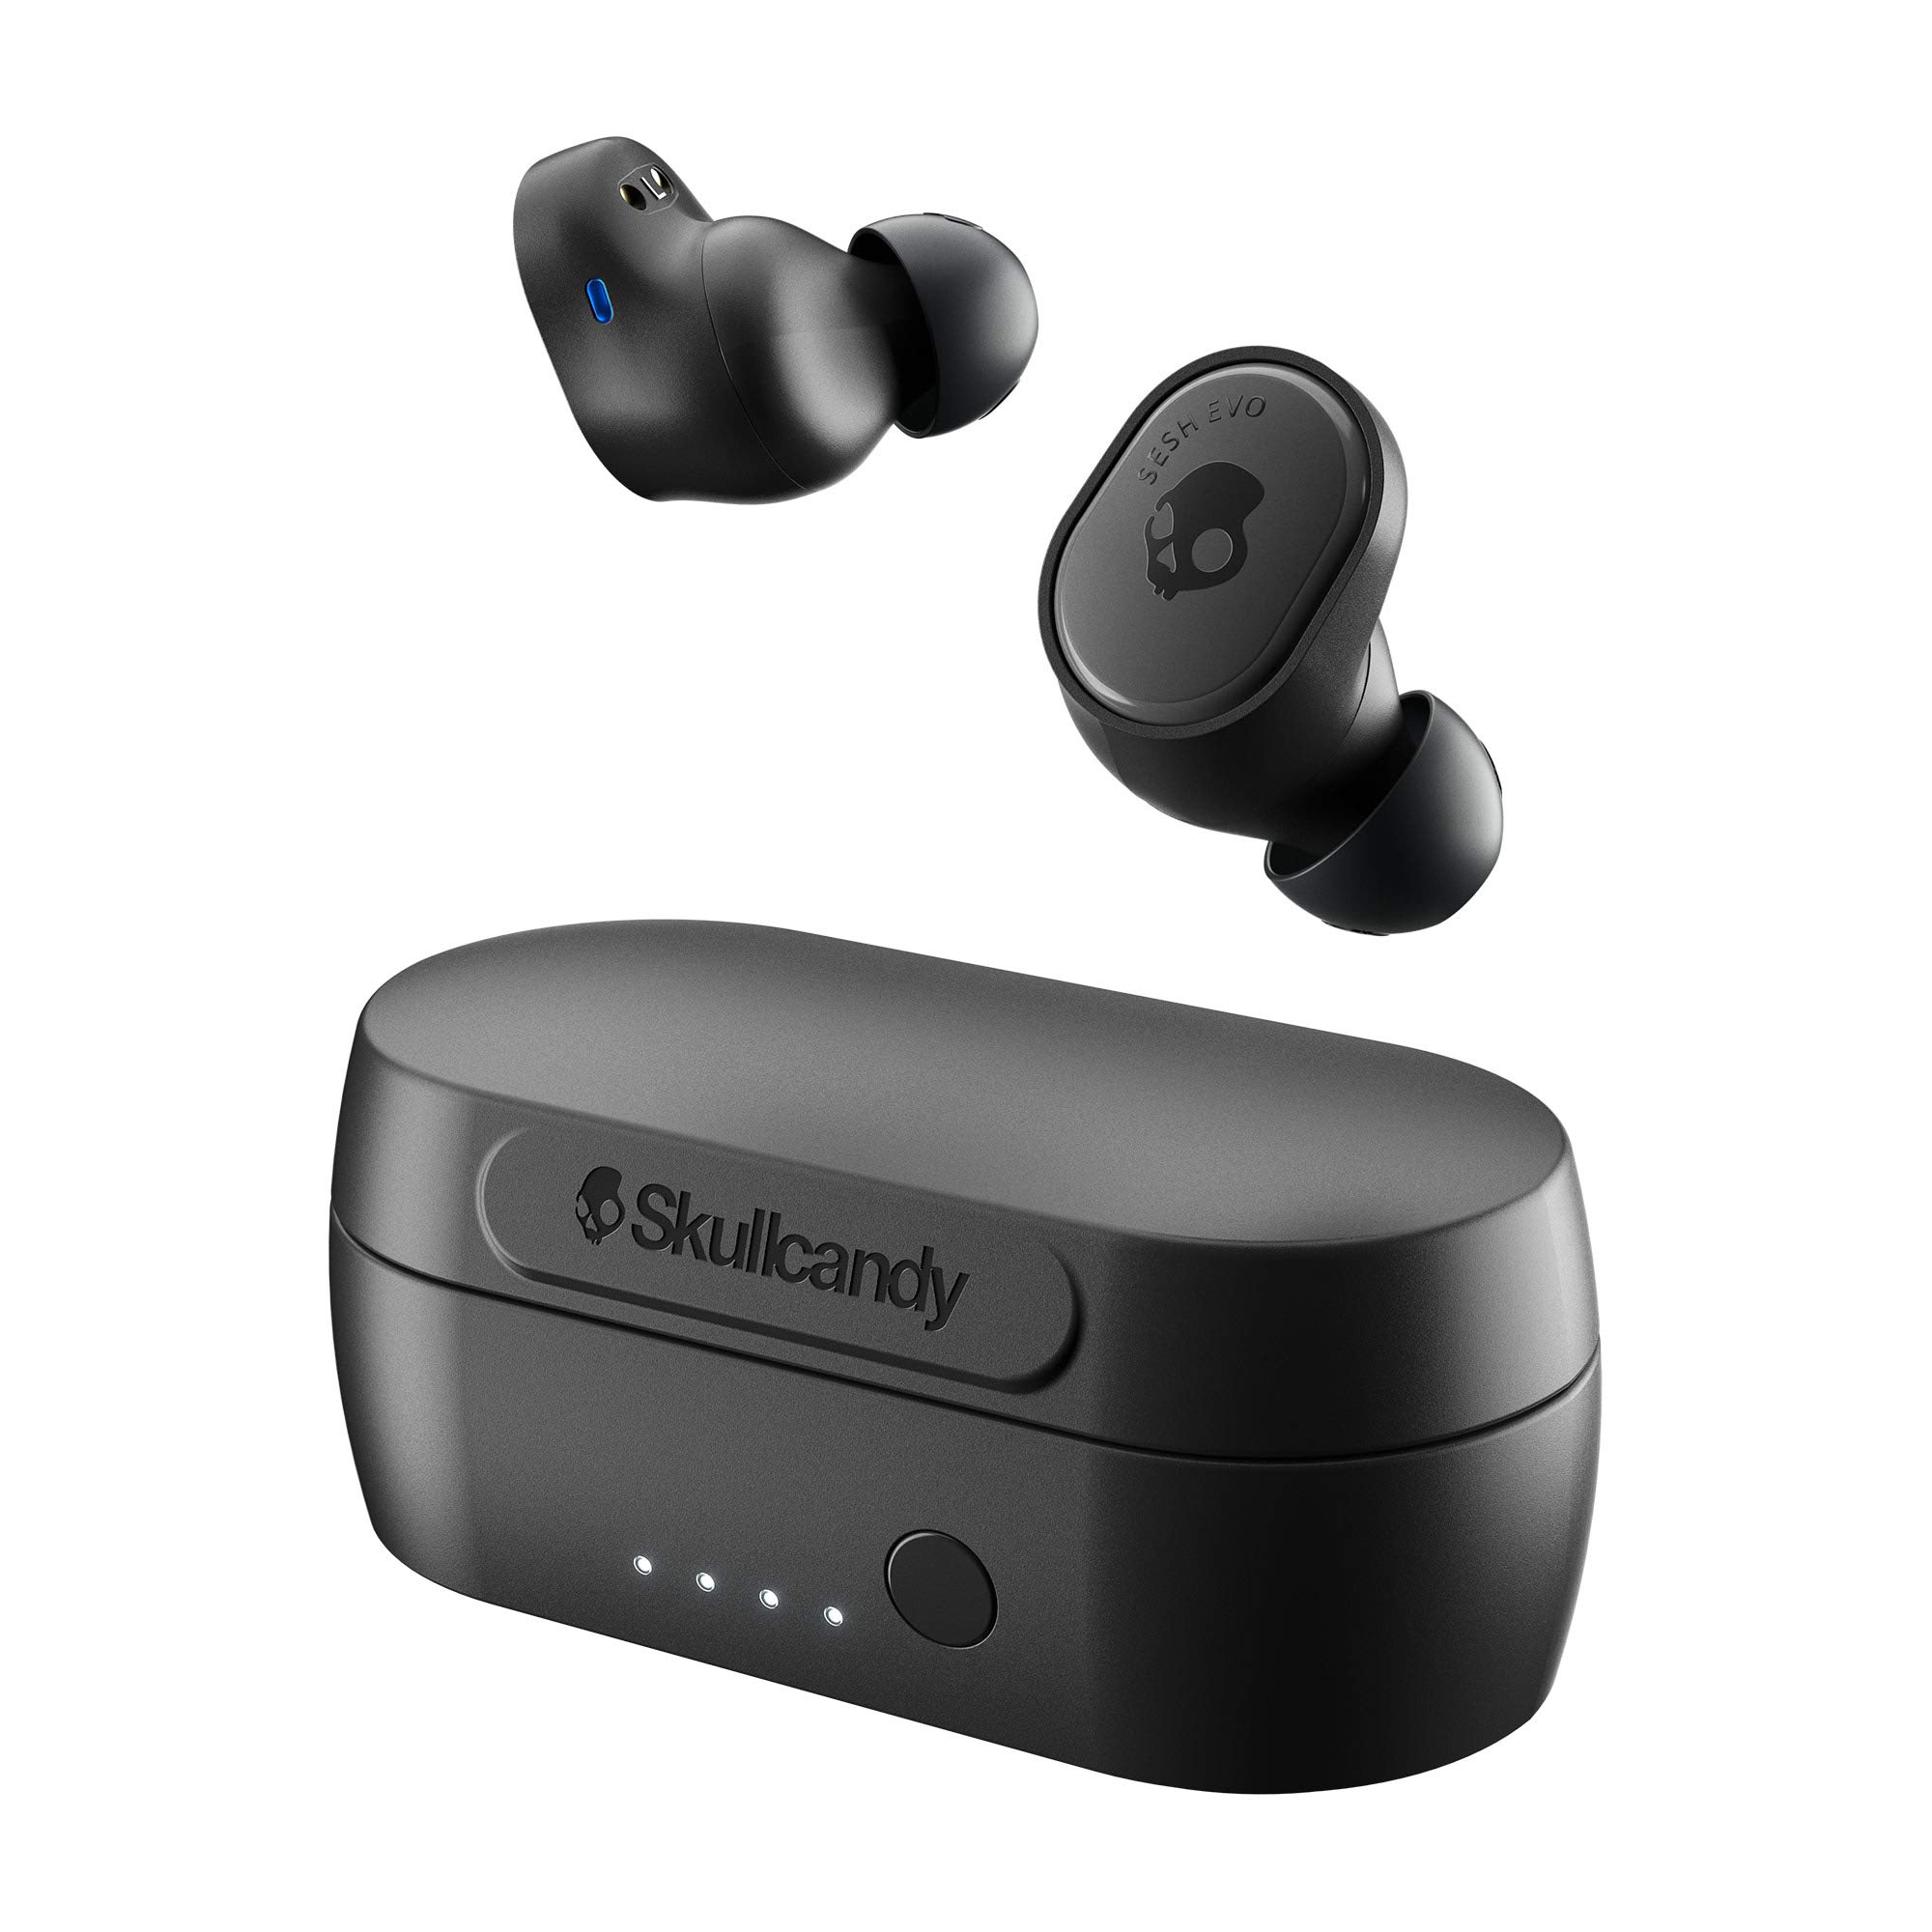 How to Pair Skullcandy Wireless Earbuds? 5